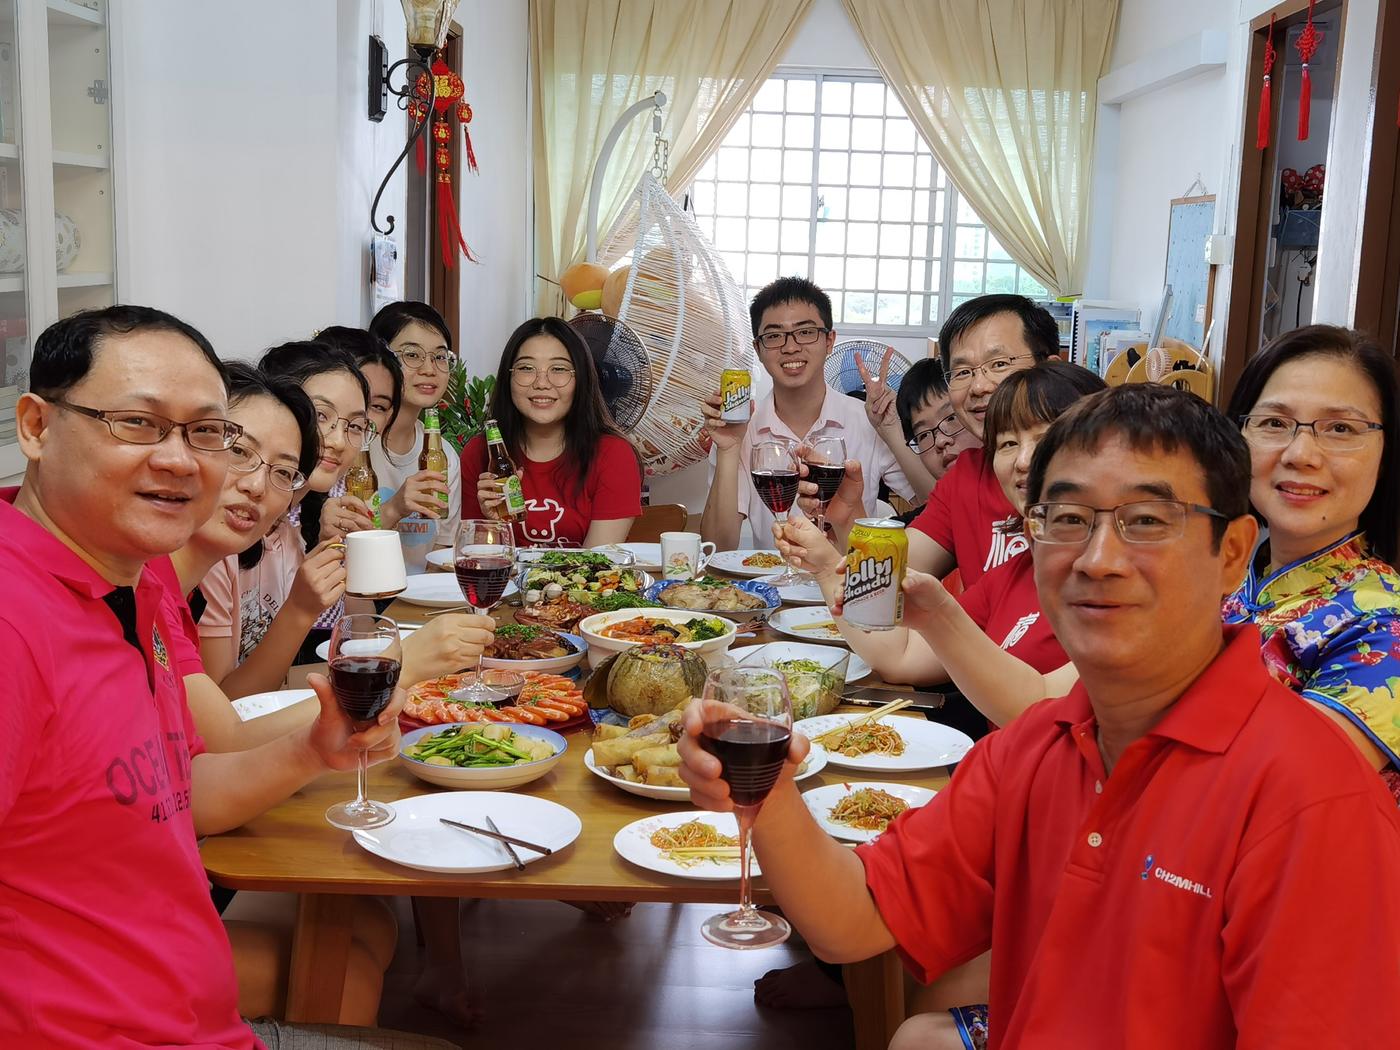 Family members around table celebrating lunar new year